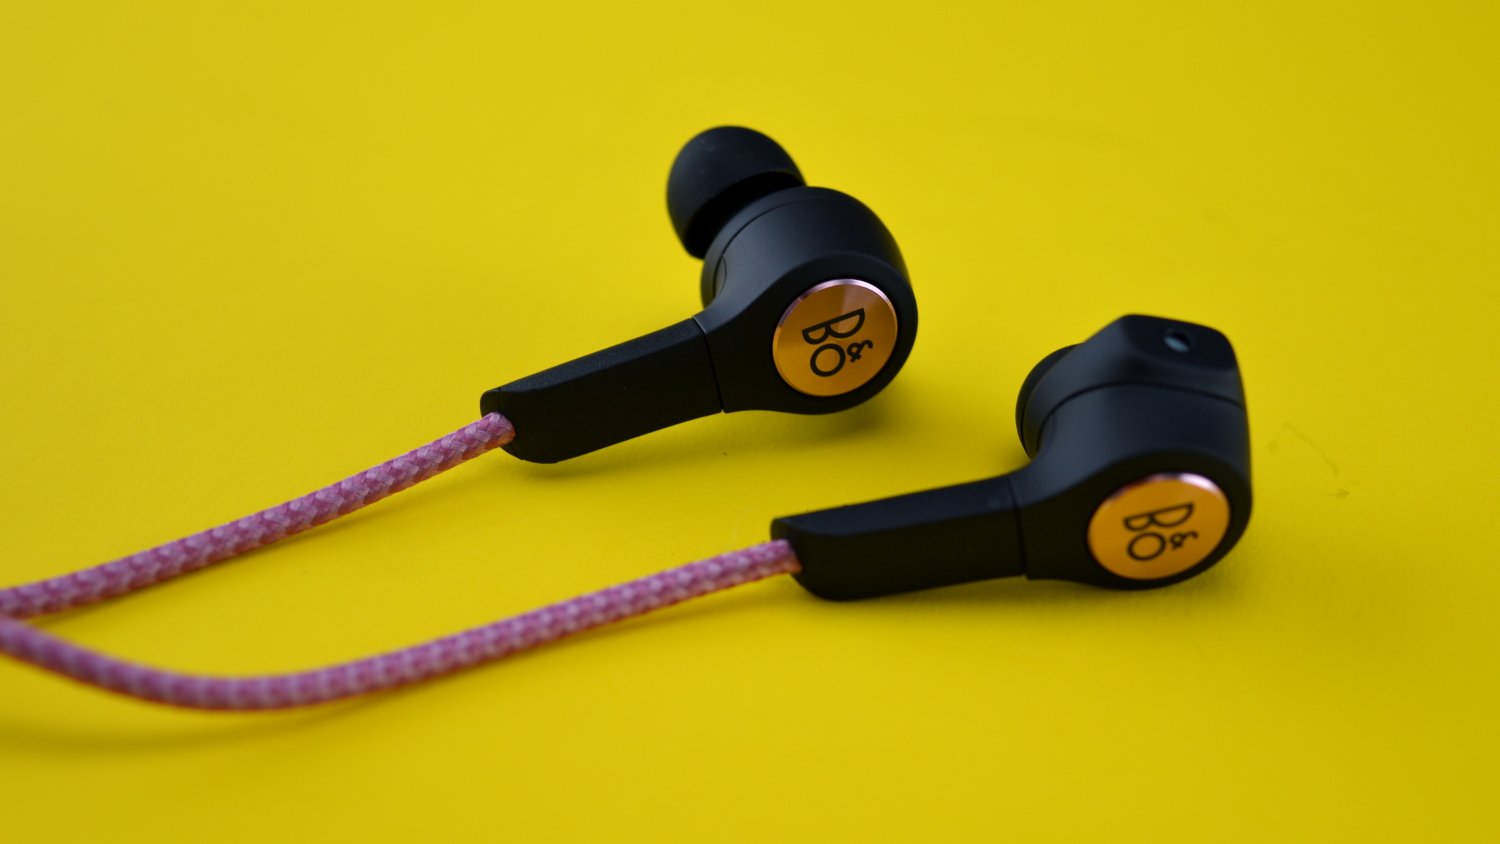 B&O Beoplay H5 Wireless Headphones Review - Headphone Review